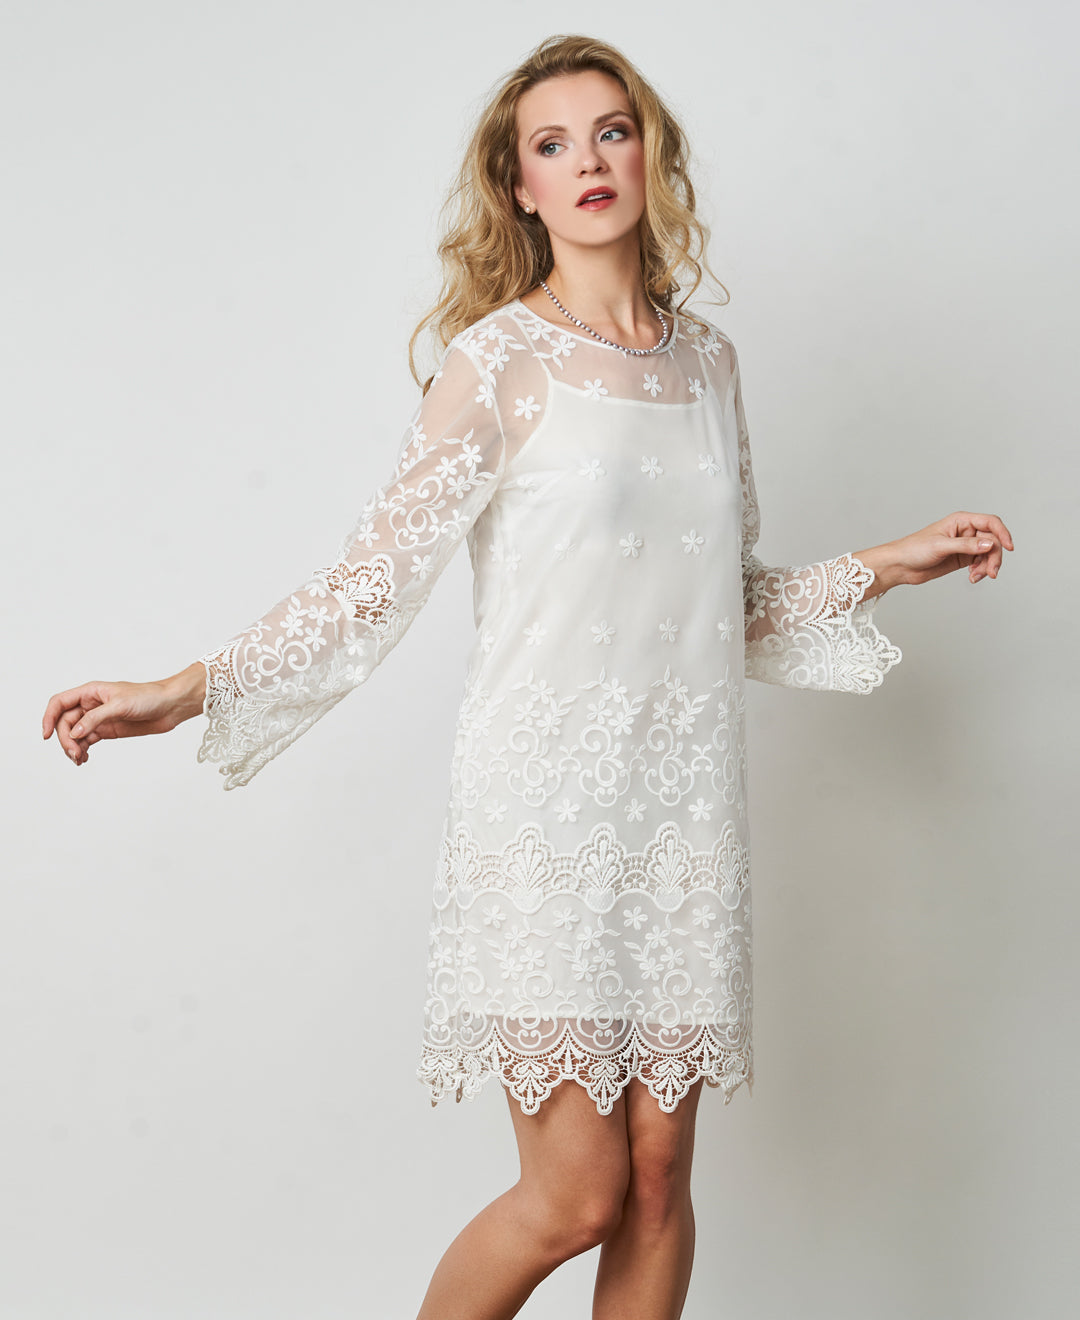 Recycled bottle lace dress